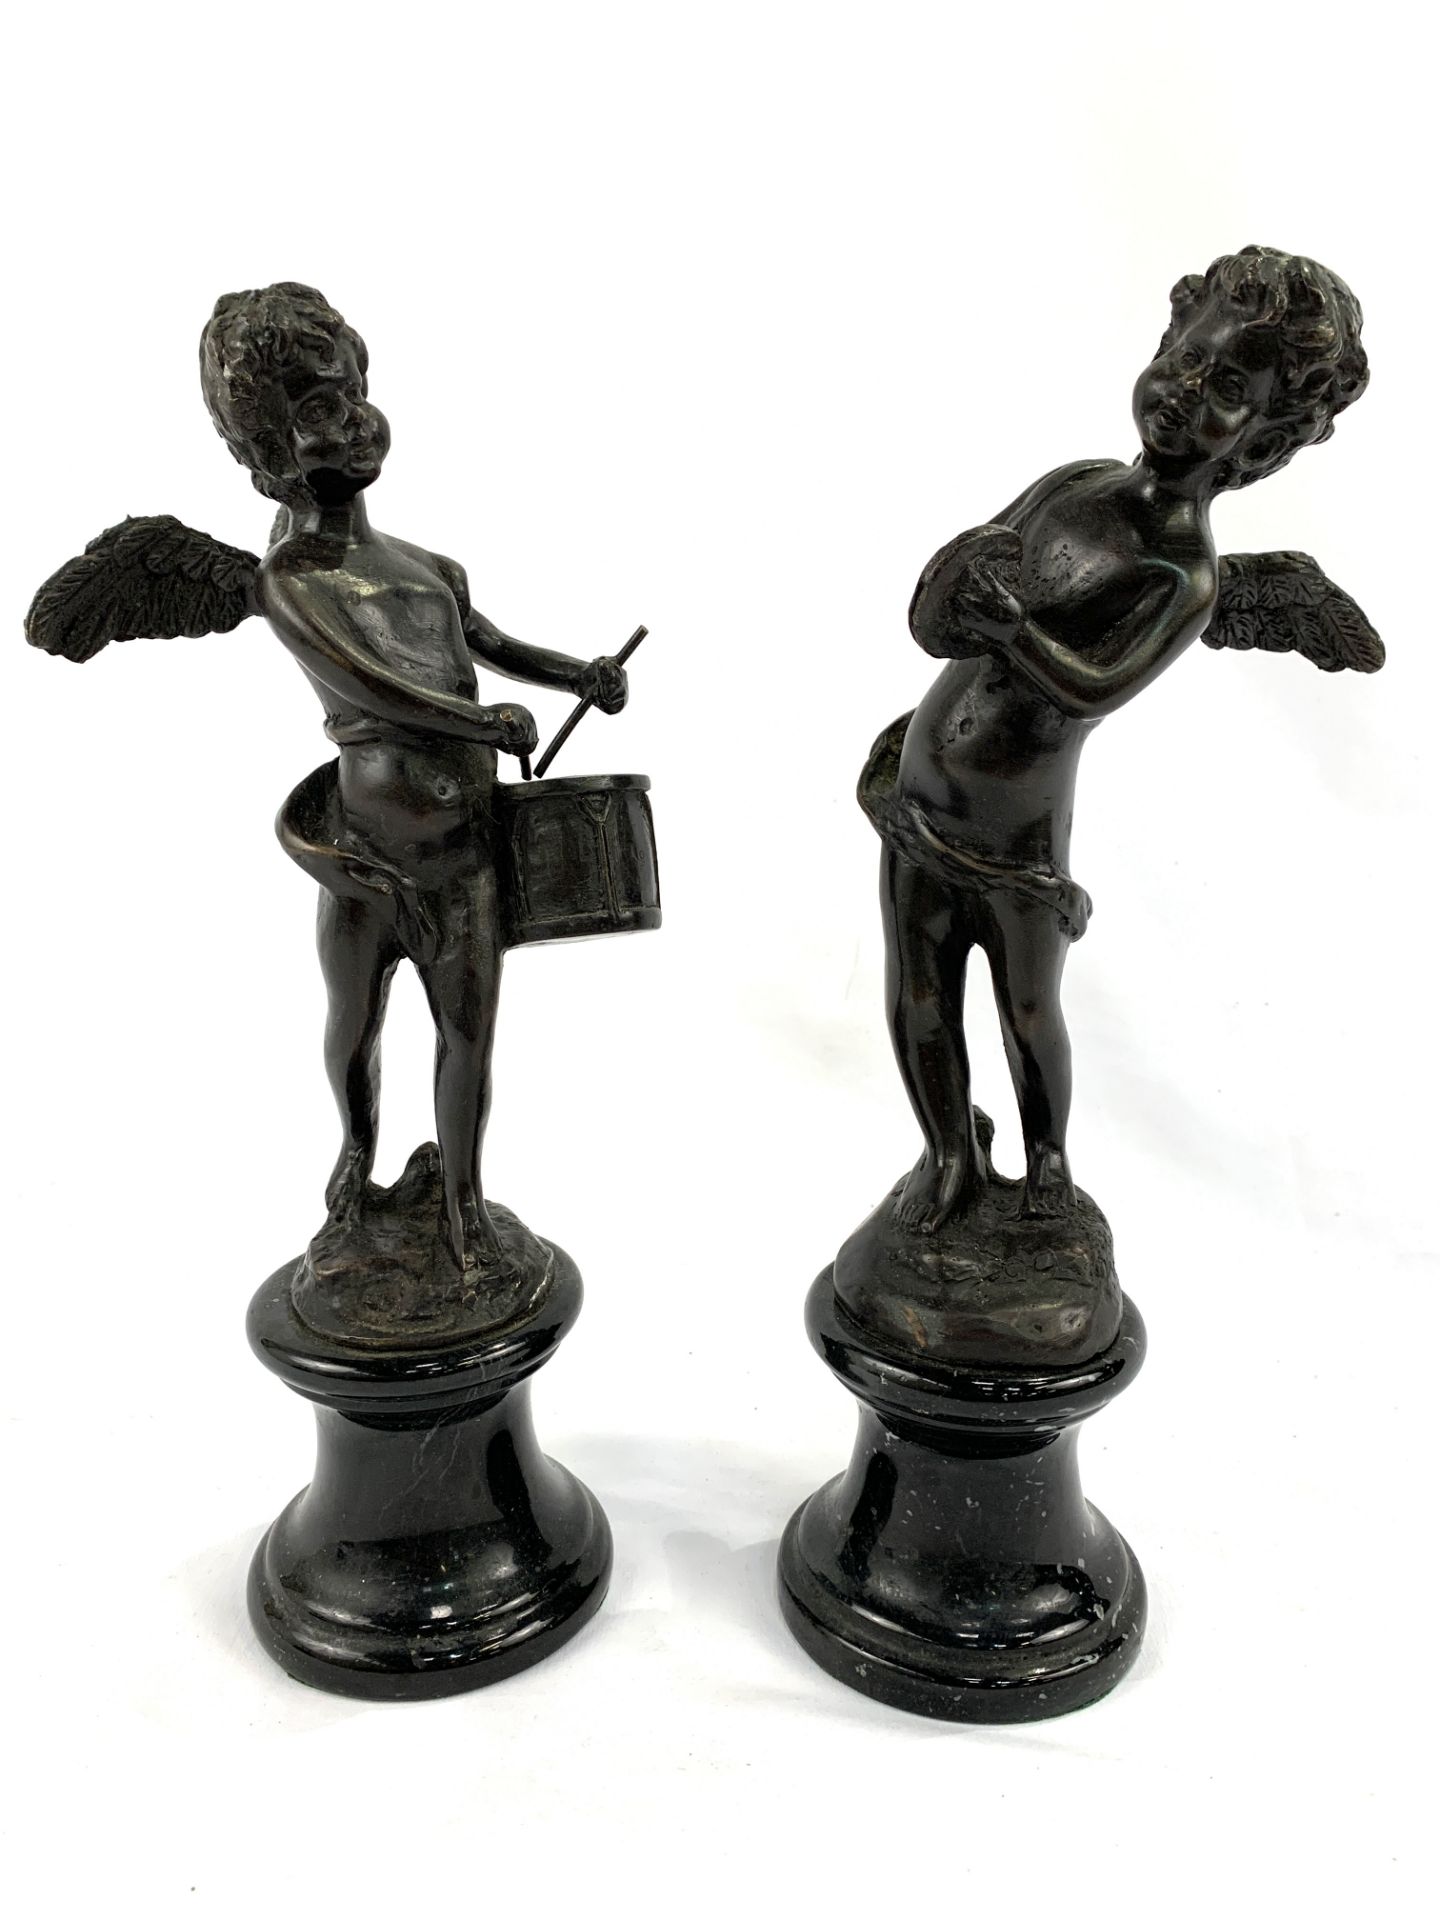 Pair of signed bronze figurines of putti on speckled marble bases, signed Auguste Moreau.